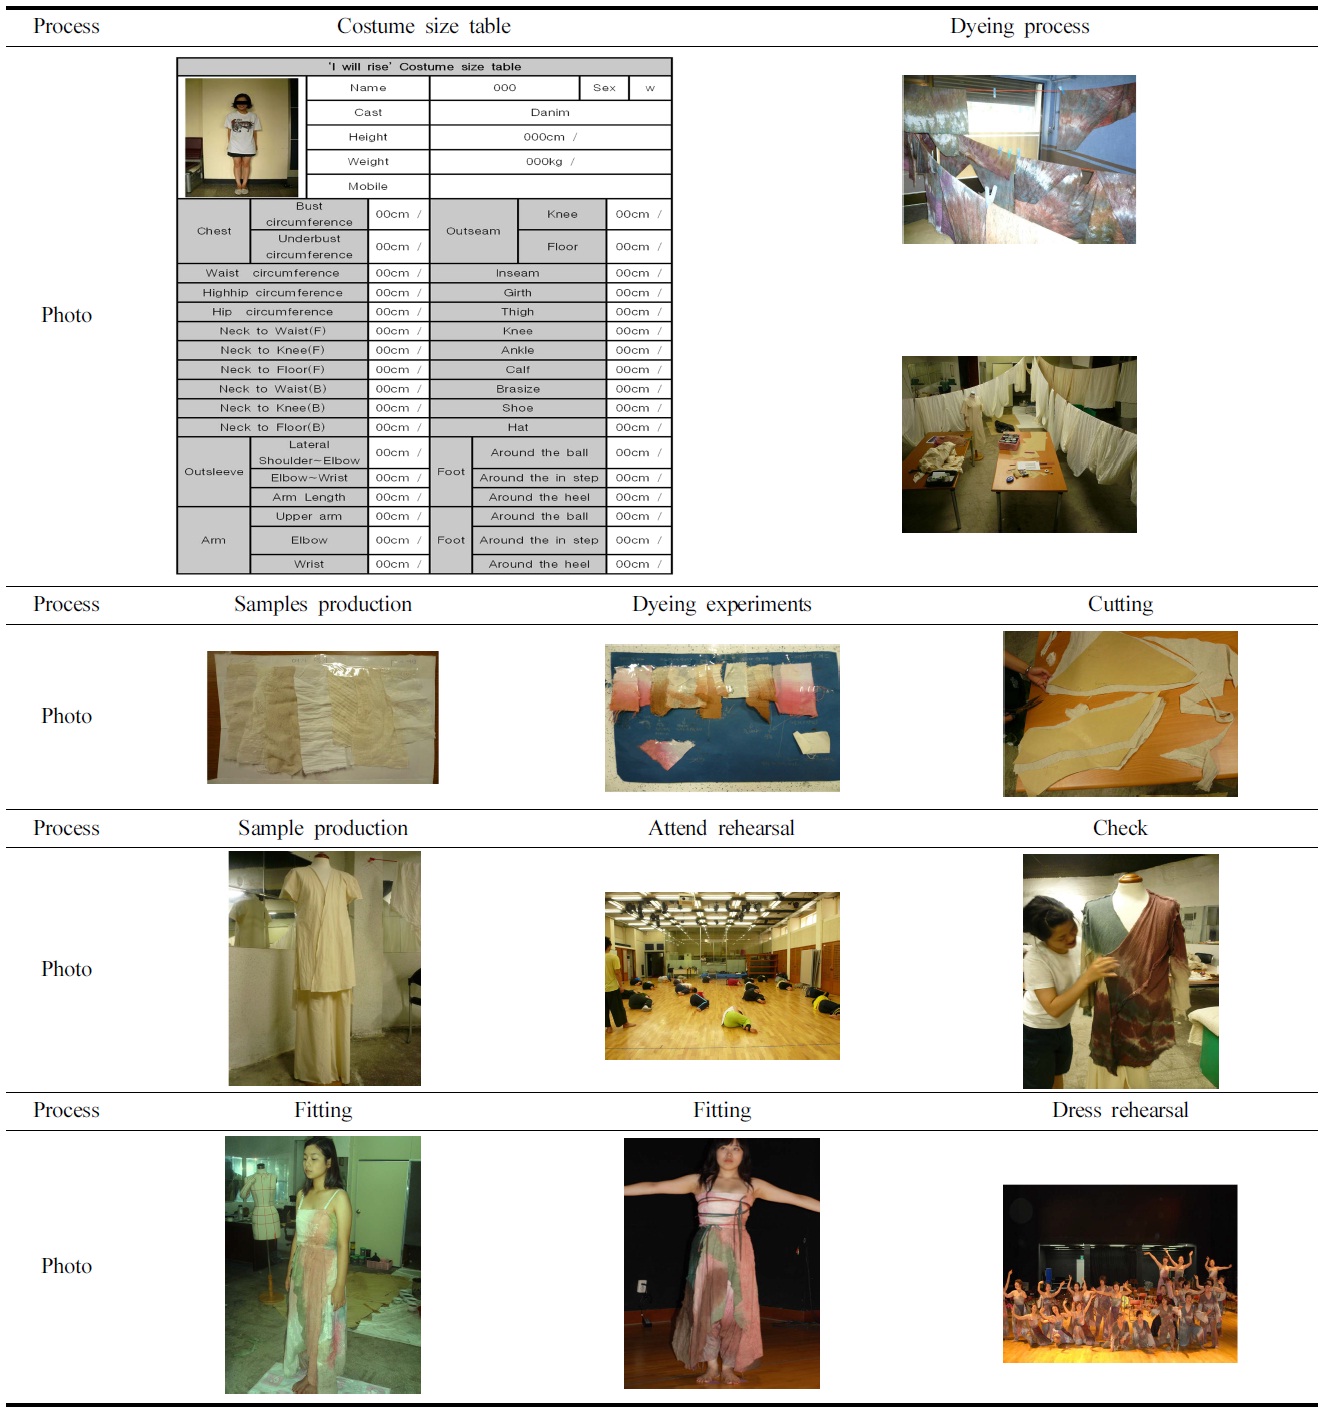 The photos of costume producing process